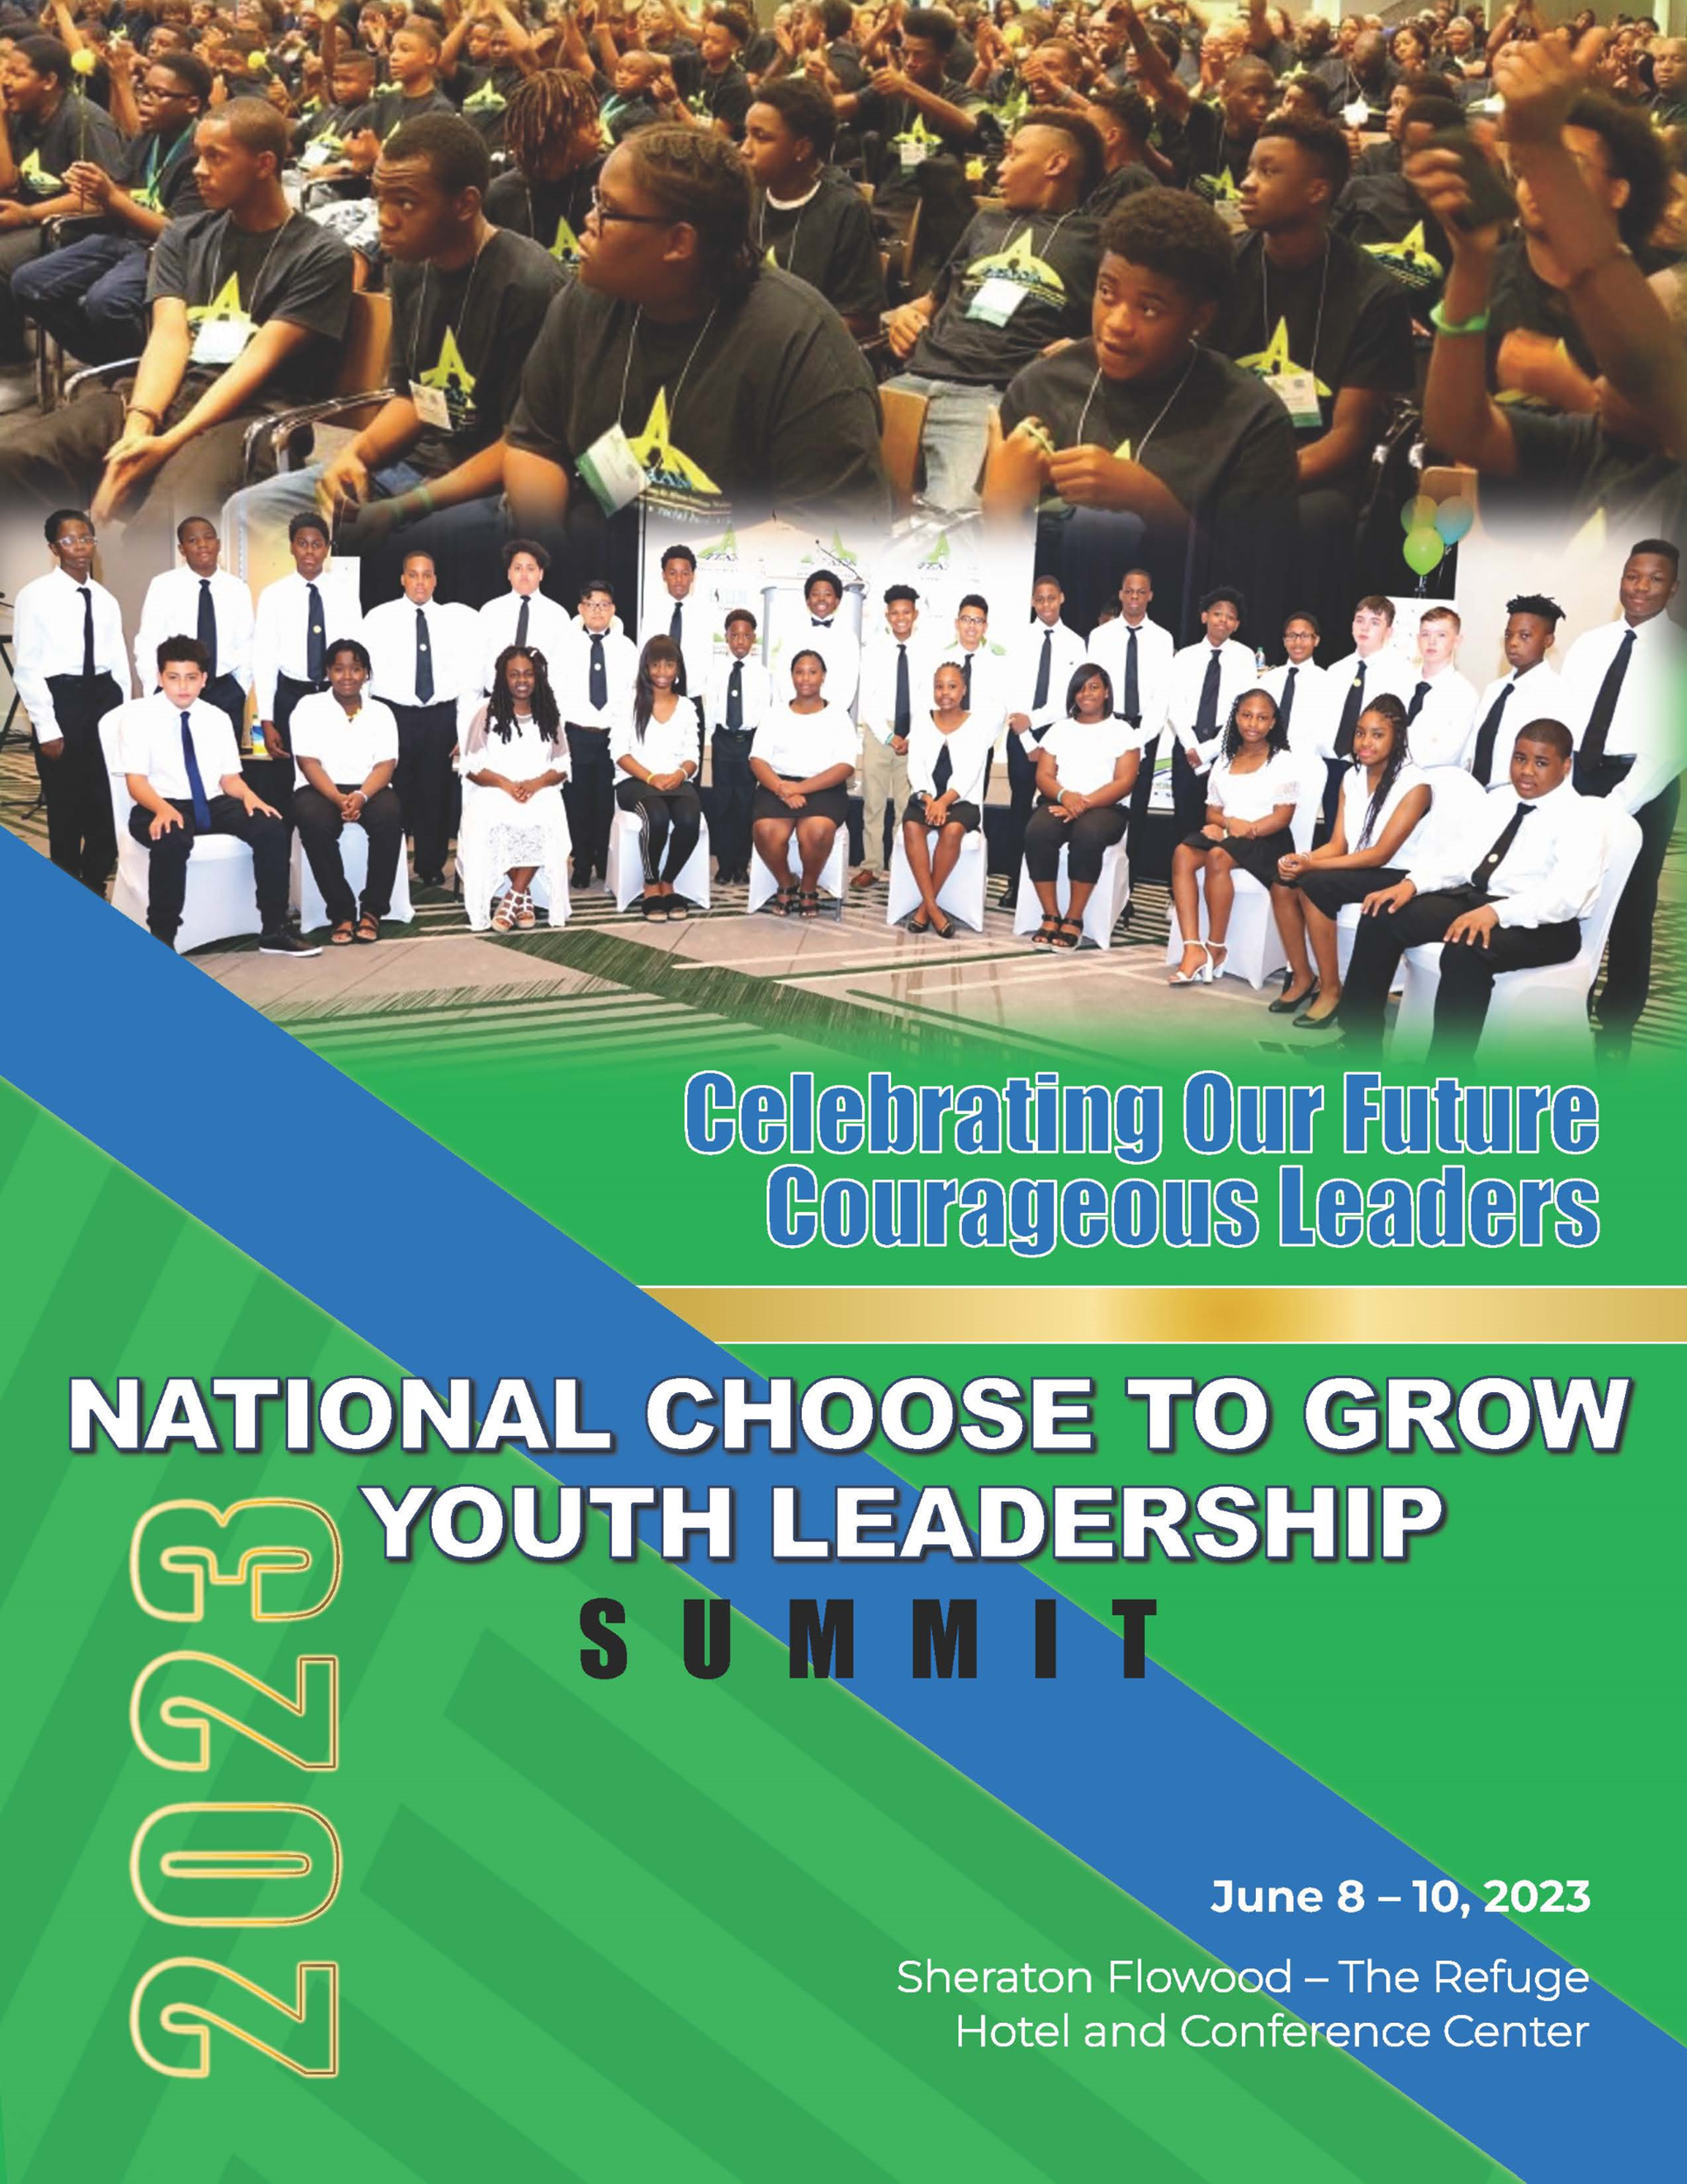 NATIONAL CHOOSE TO GROW NATIONAL YOUTH LEADERSHIP SUMMIT